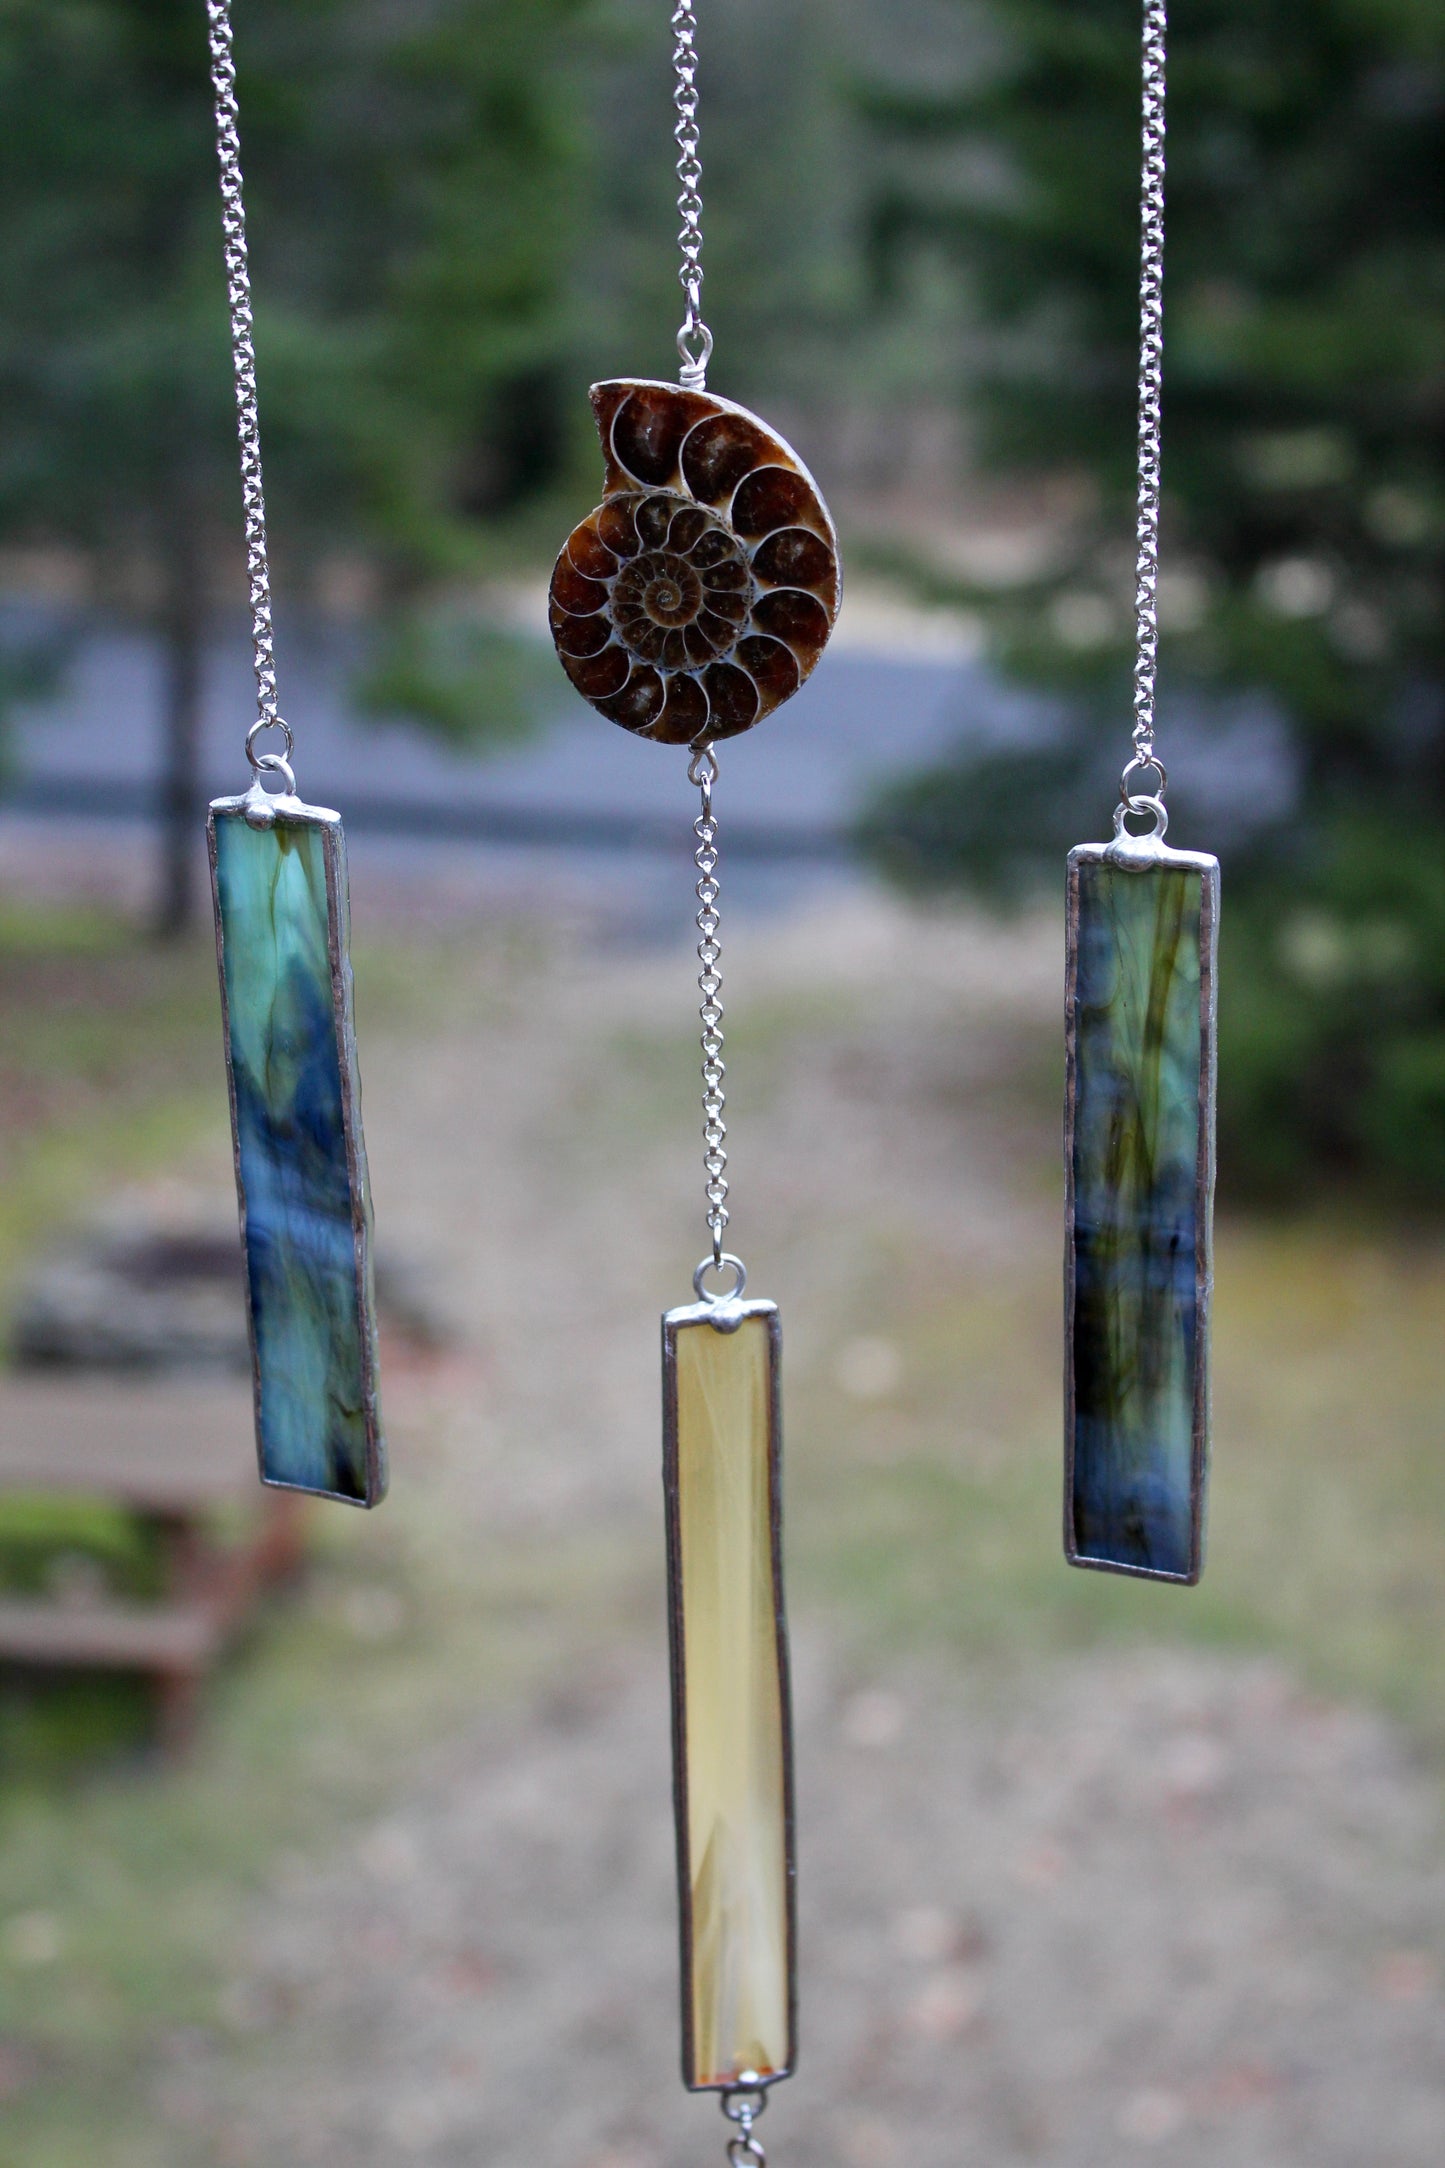 Drift Wood Stained Glass Mobile with Ammonite